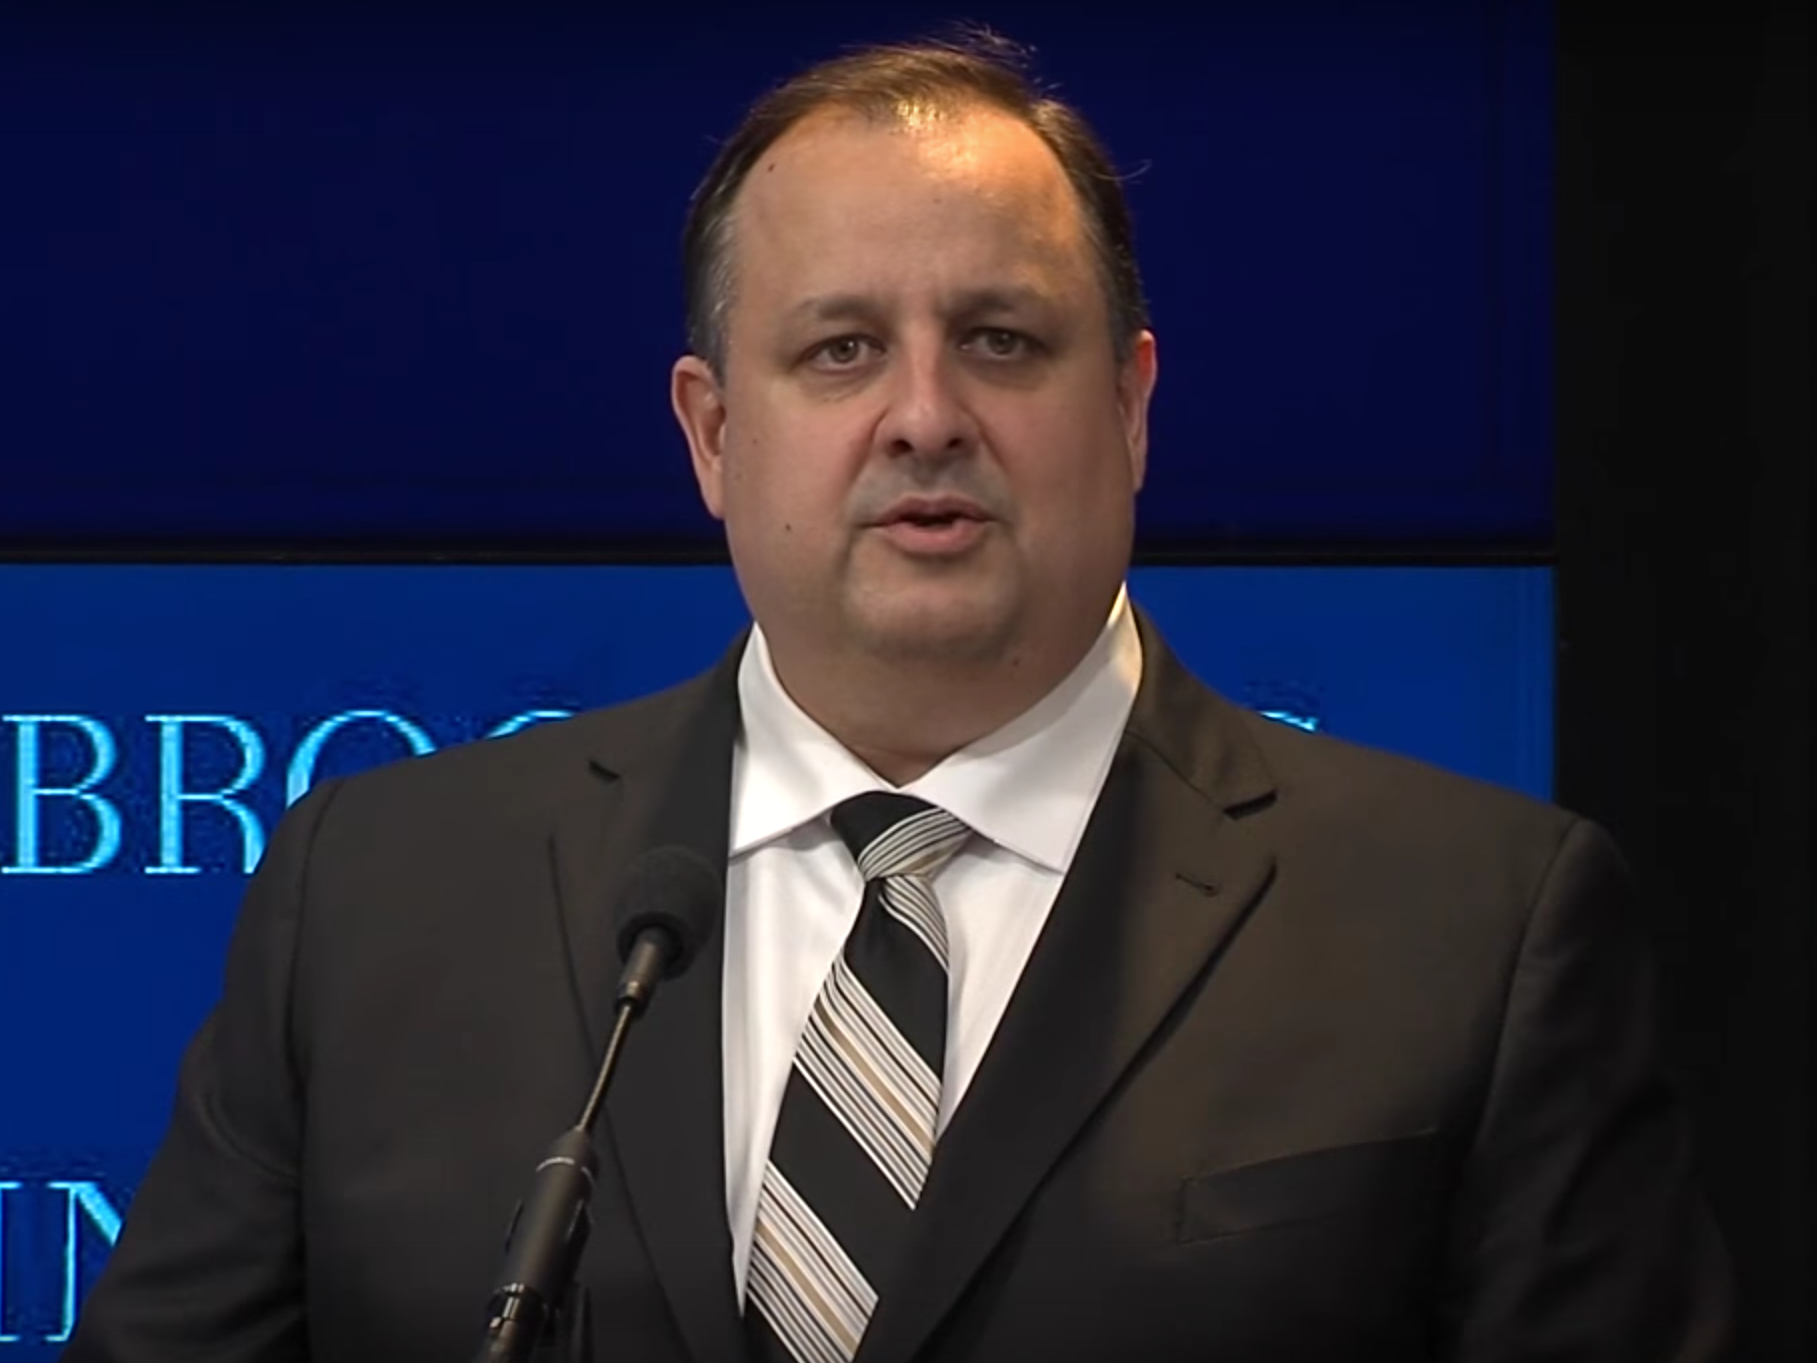 Director of US Office of Government Ethics Walter Shaub speaks at the Brookings Institution